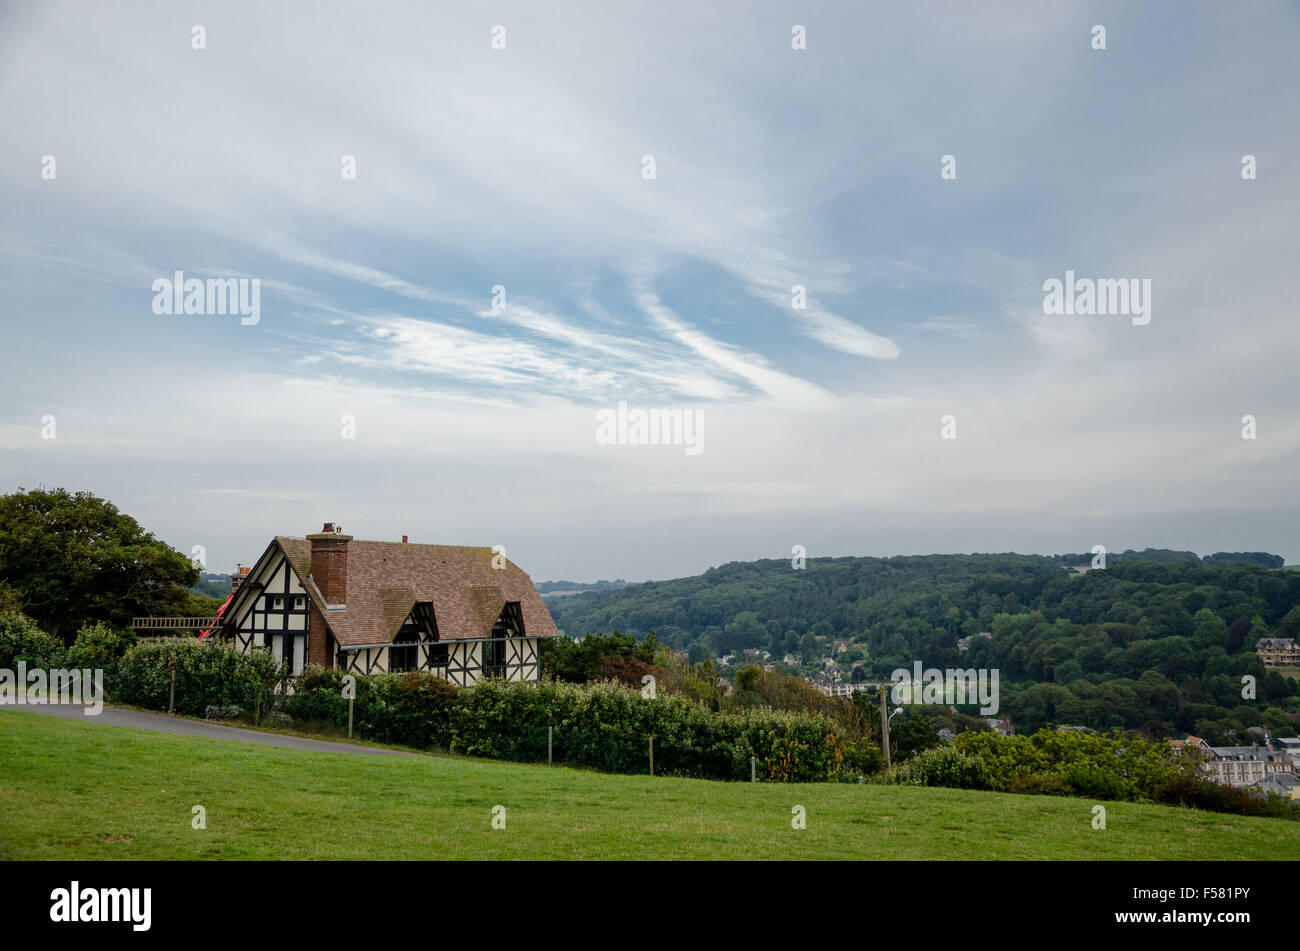 Landscape with house Stock Photo